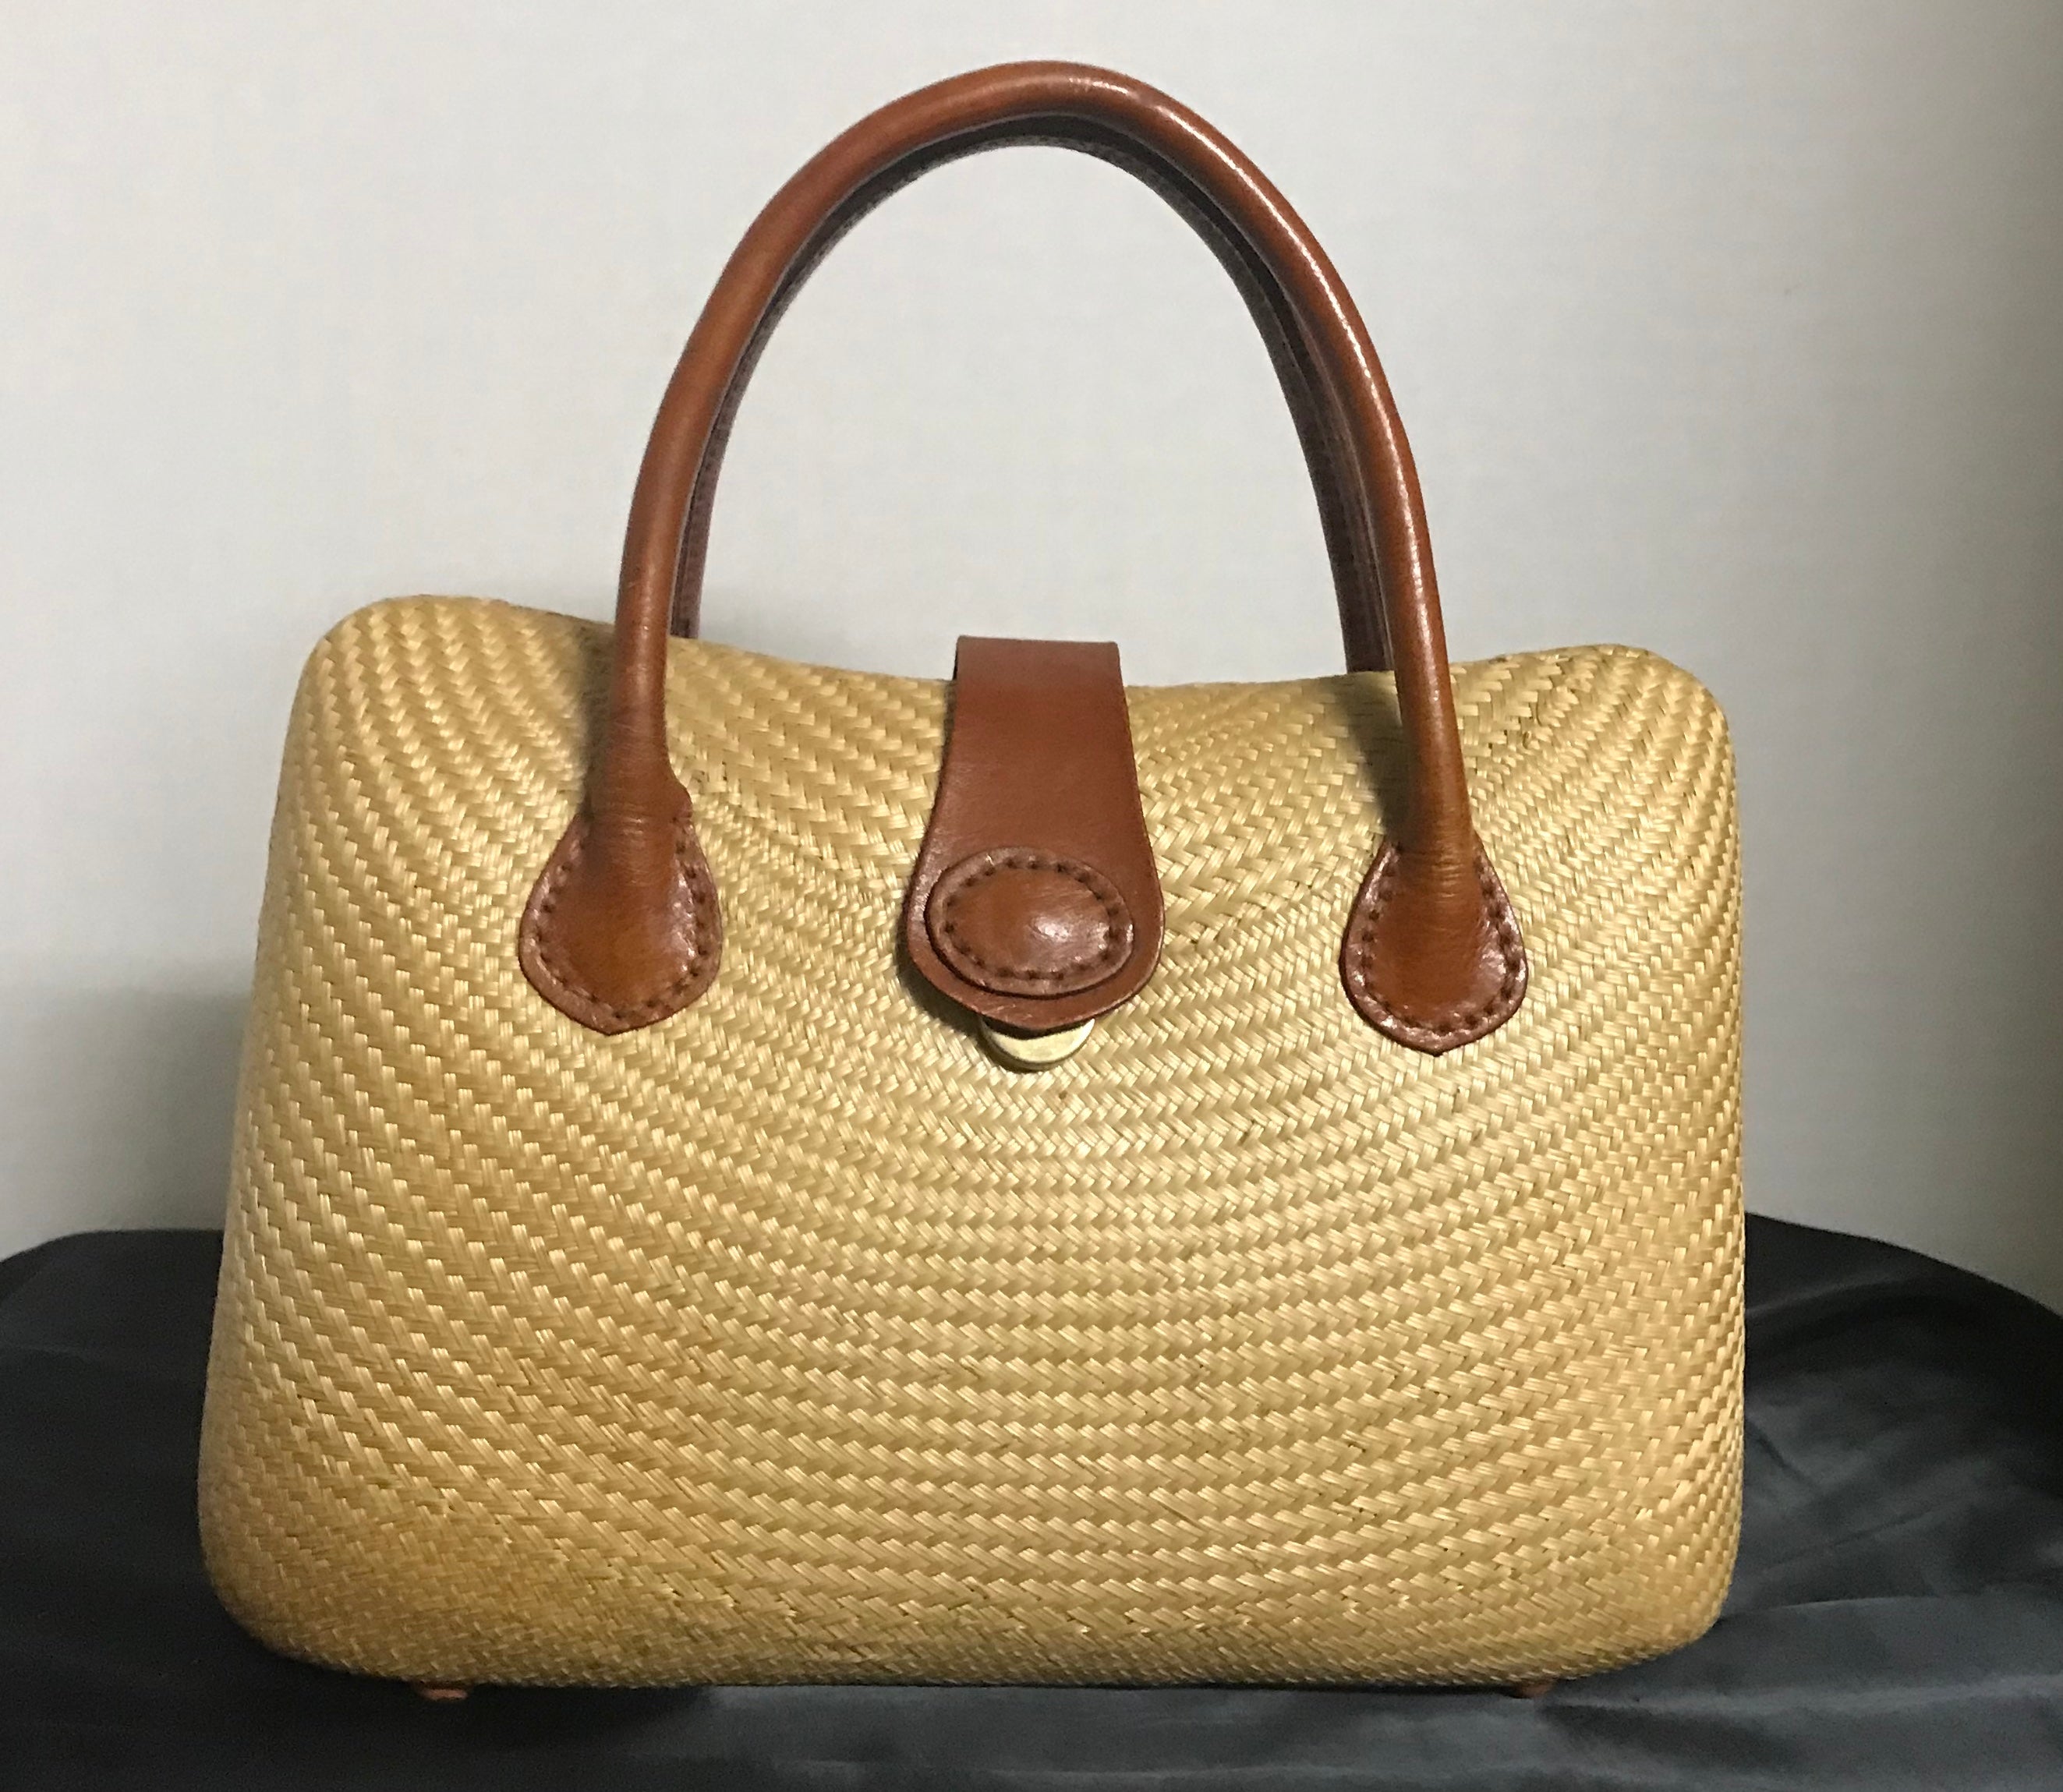 Philippine Craft Hanbag with leather handles